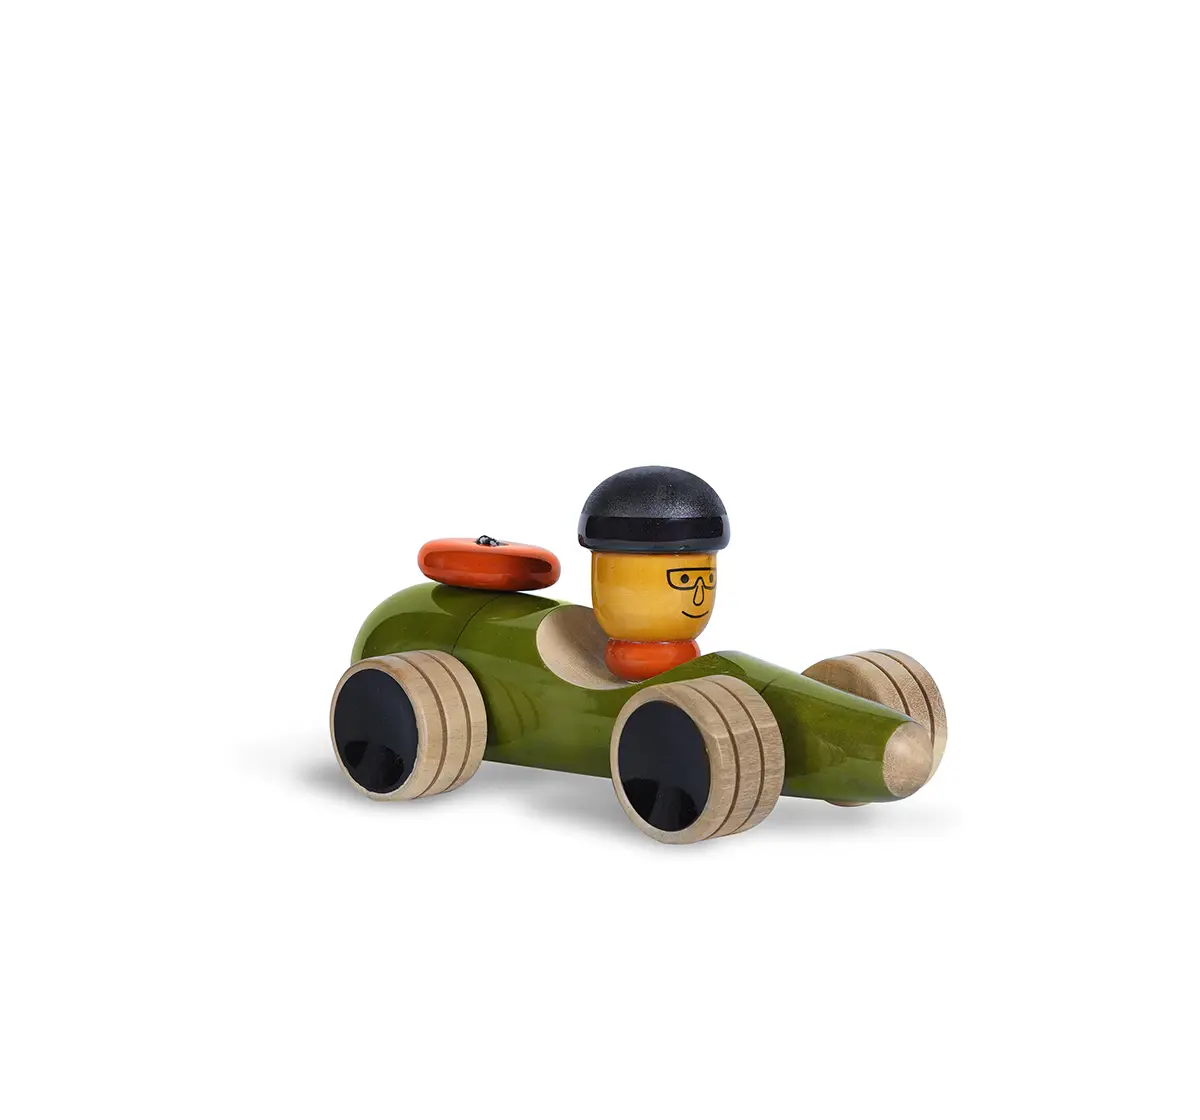 Folktales Handmade Wooden Vroom Toy 3 Wooden Toys for Kids age 1Y+ (Green)